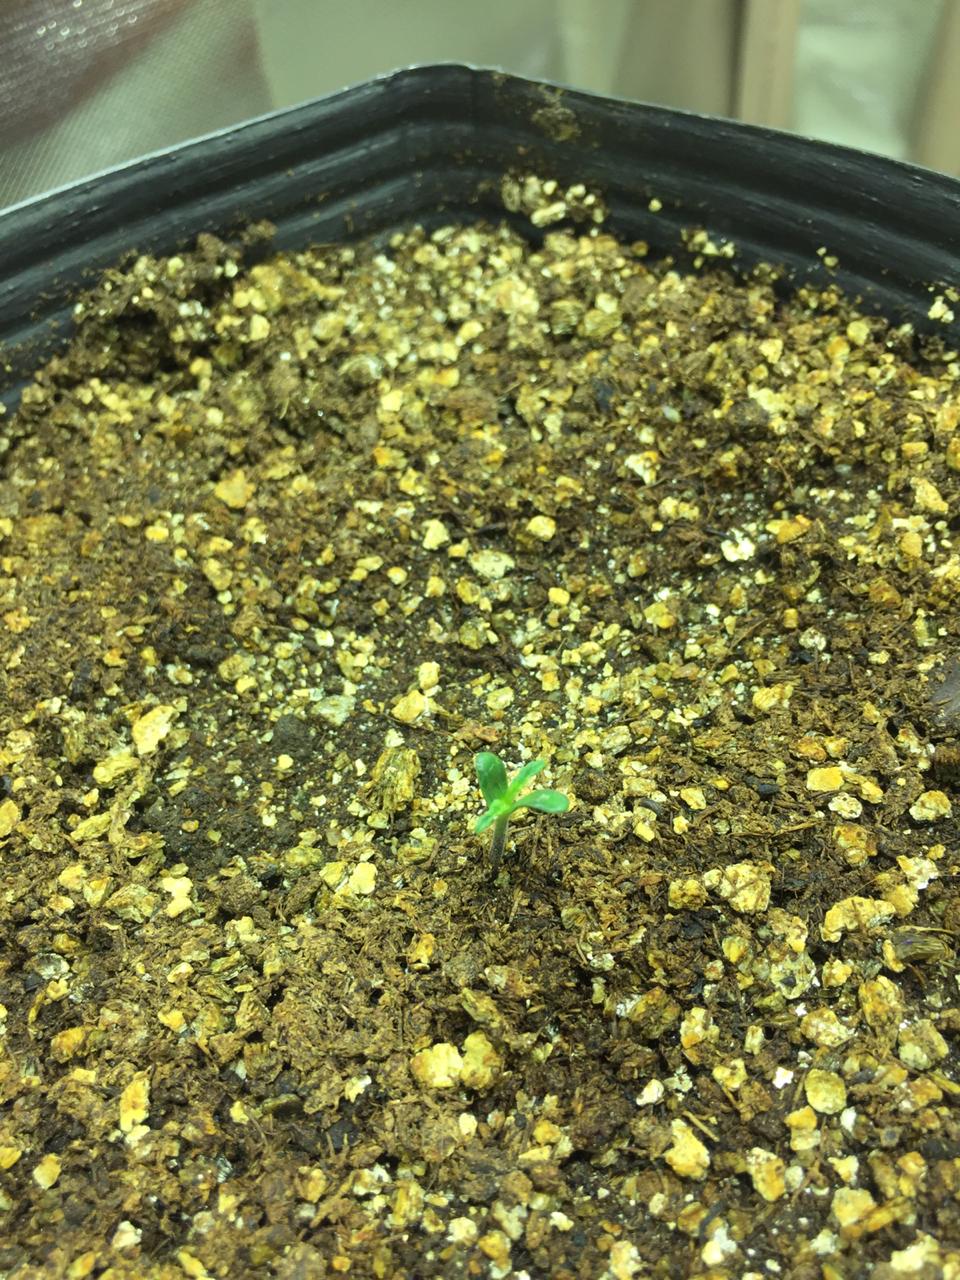 6 days into seedling they look weak what is wrong 1st time 2